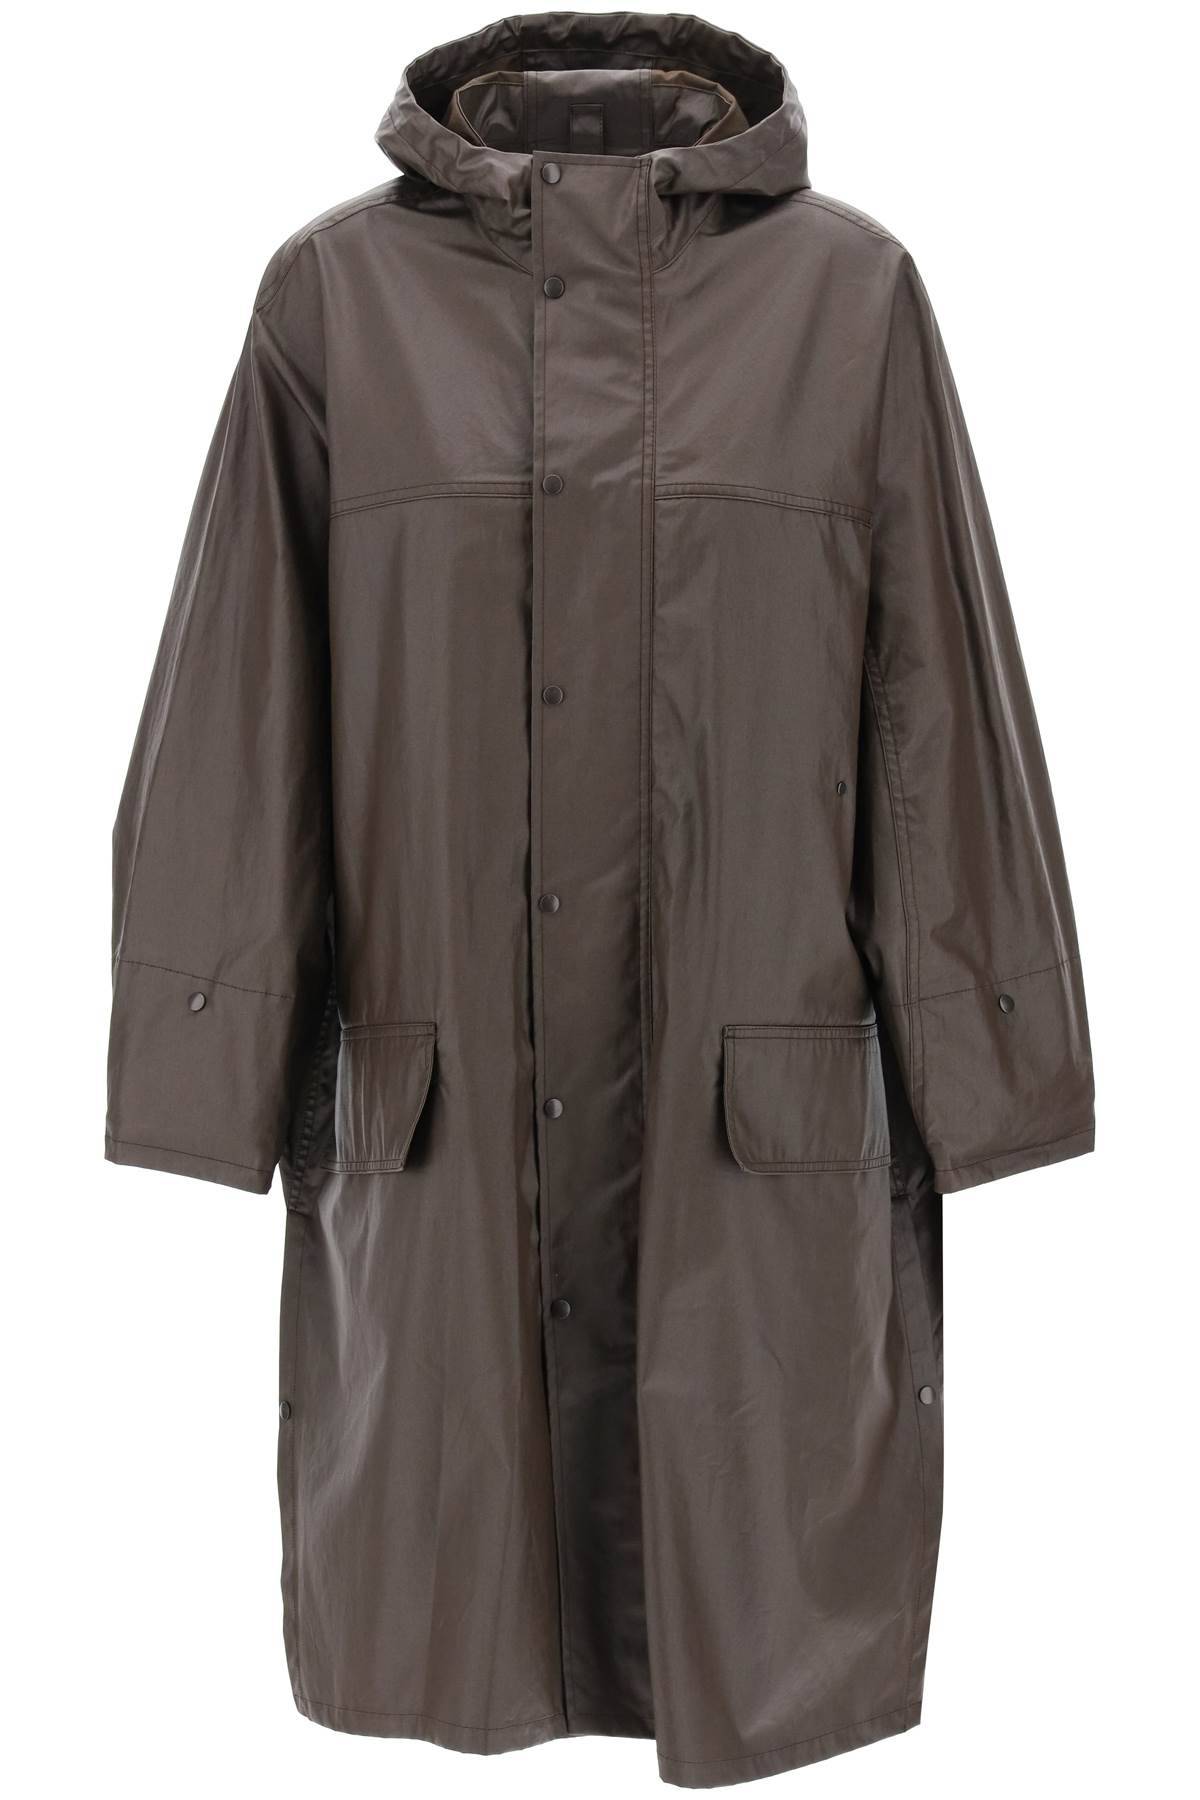 Lemaire LEMAIRE cotton-coated trench coat